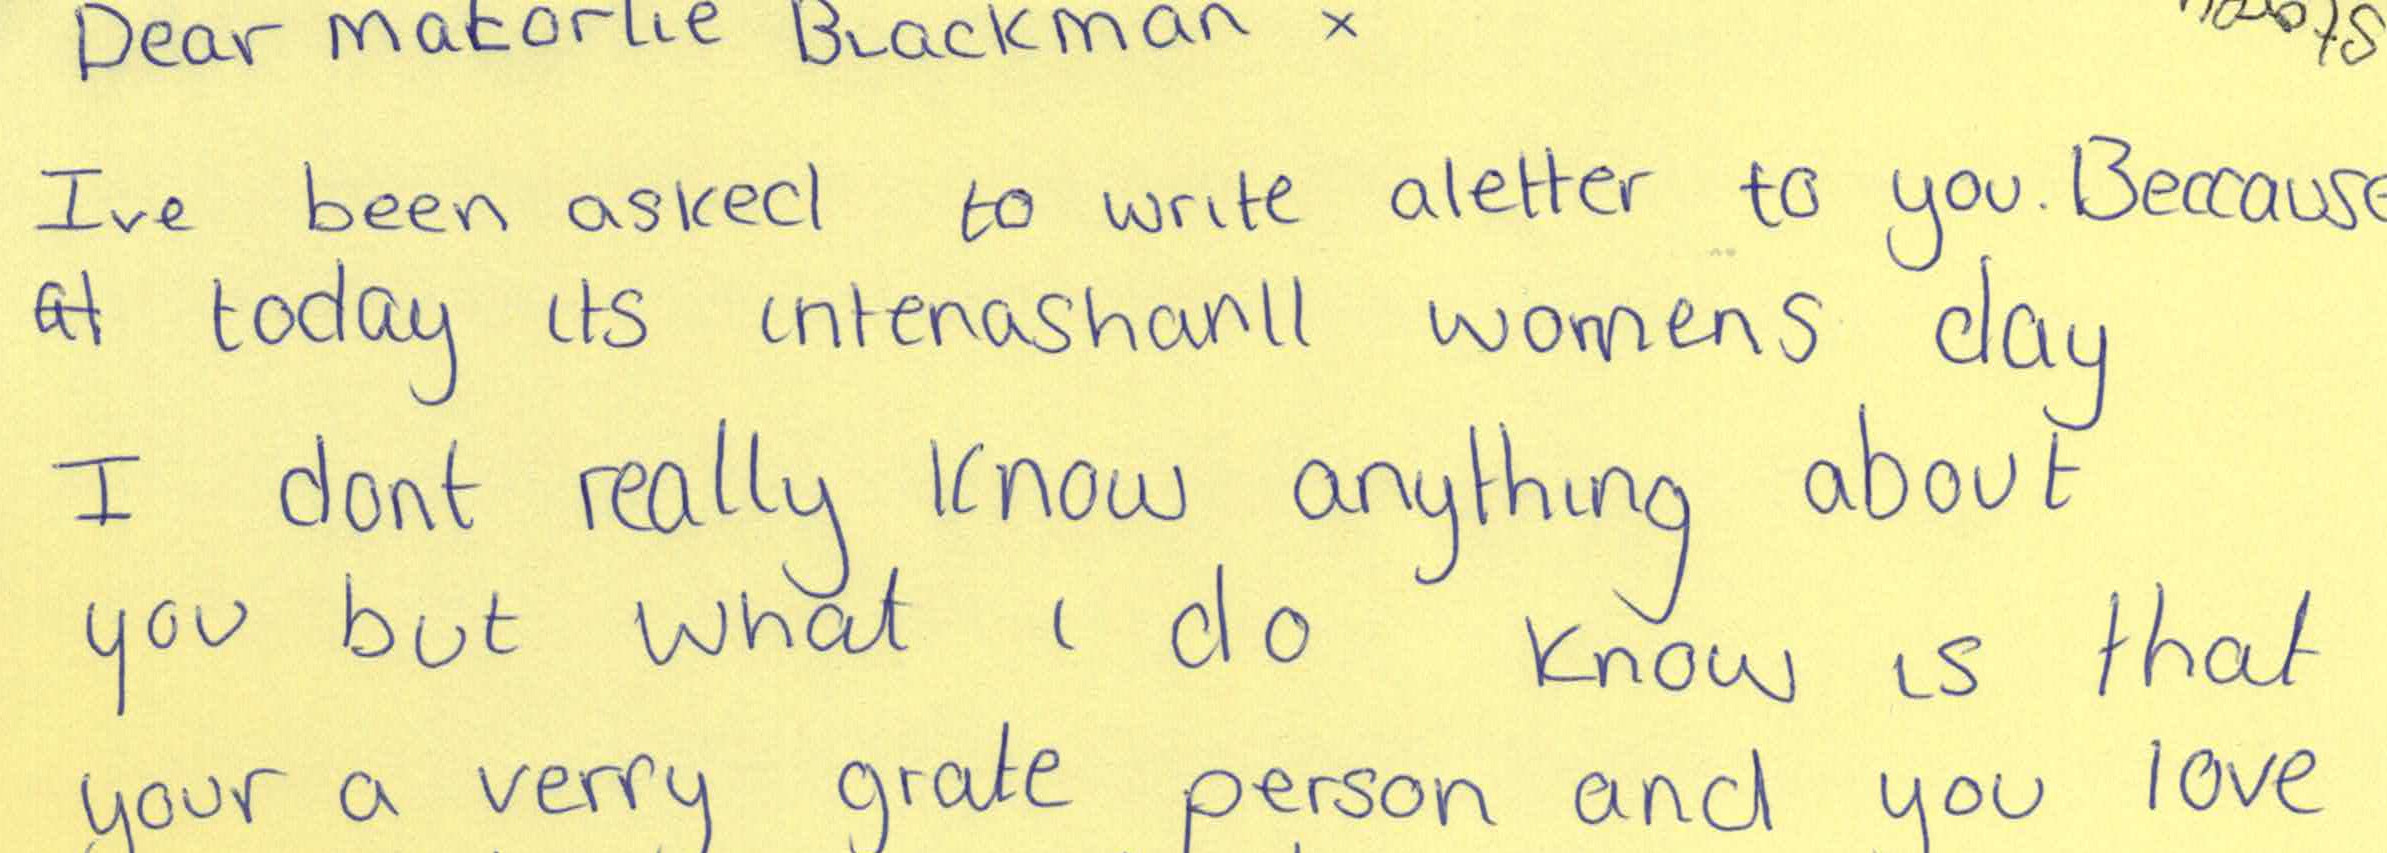 Letter to Malorie Blackman from Macey-Leigh Stenson